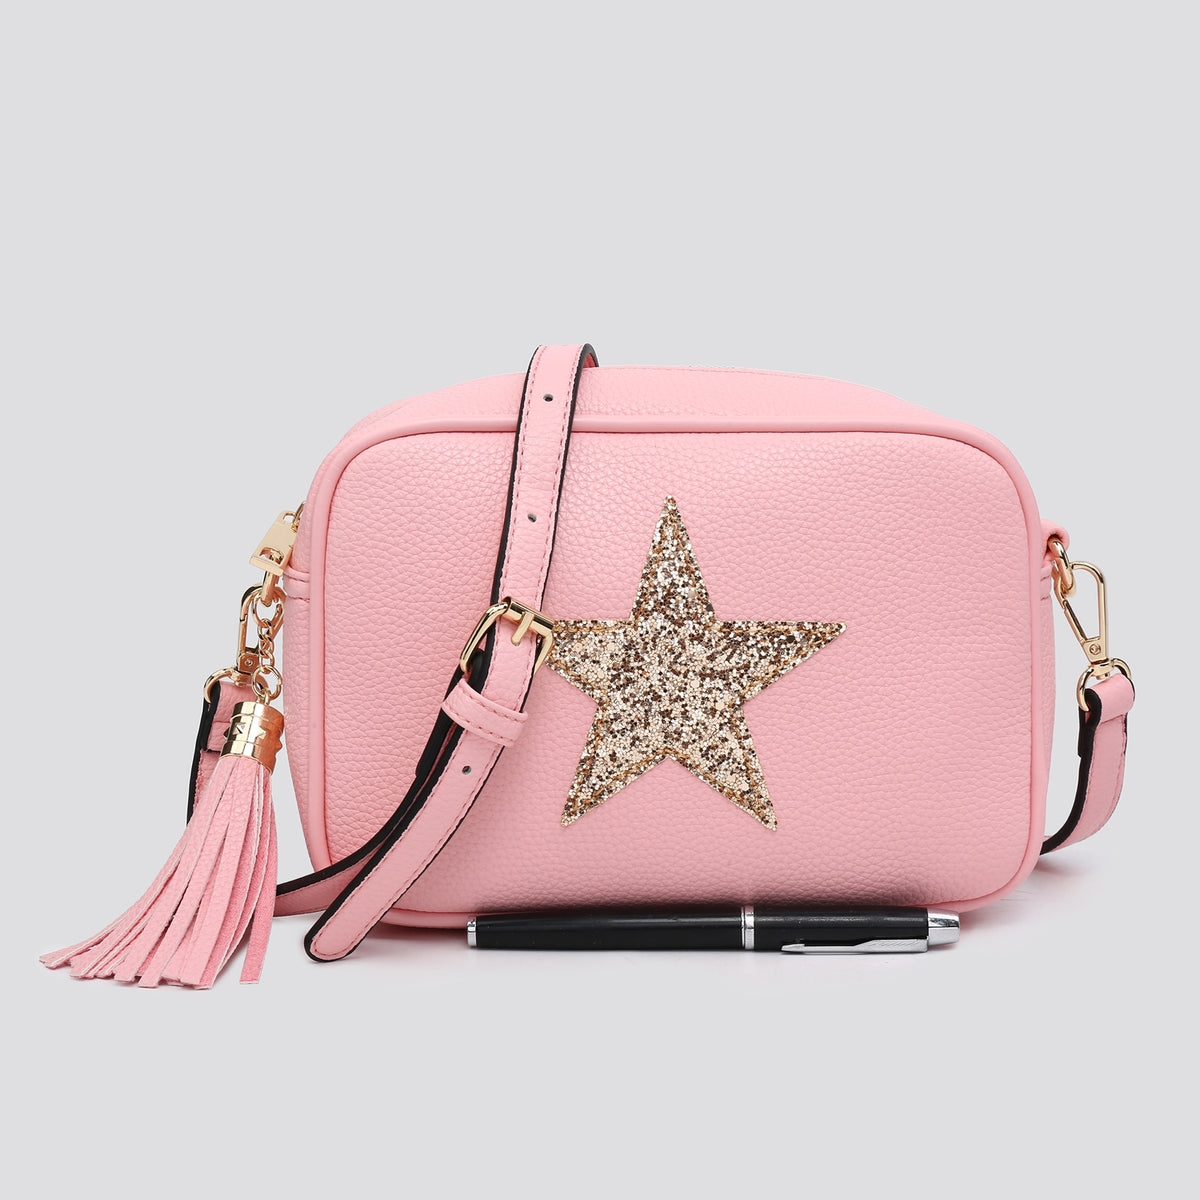 Bag with star detail